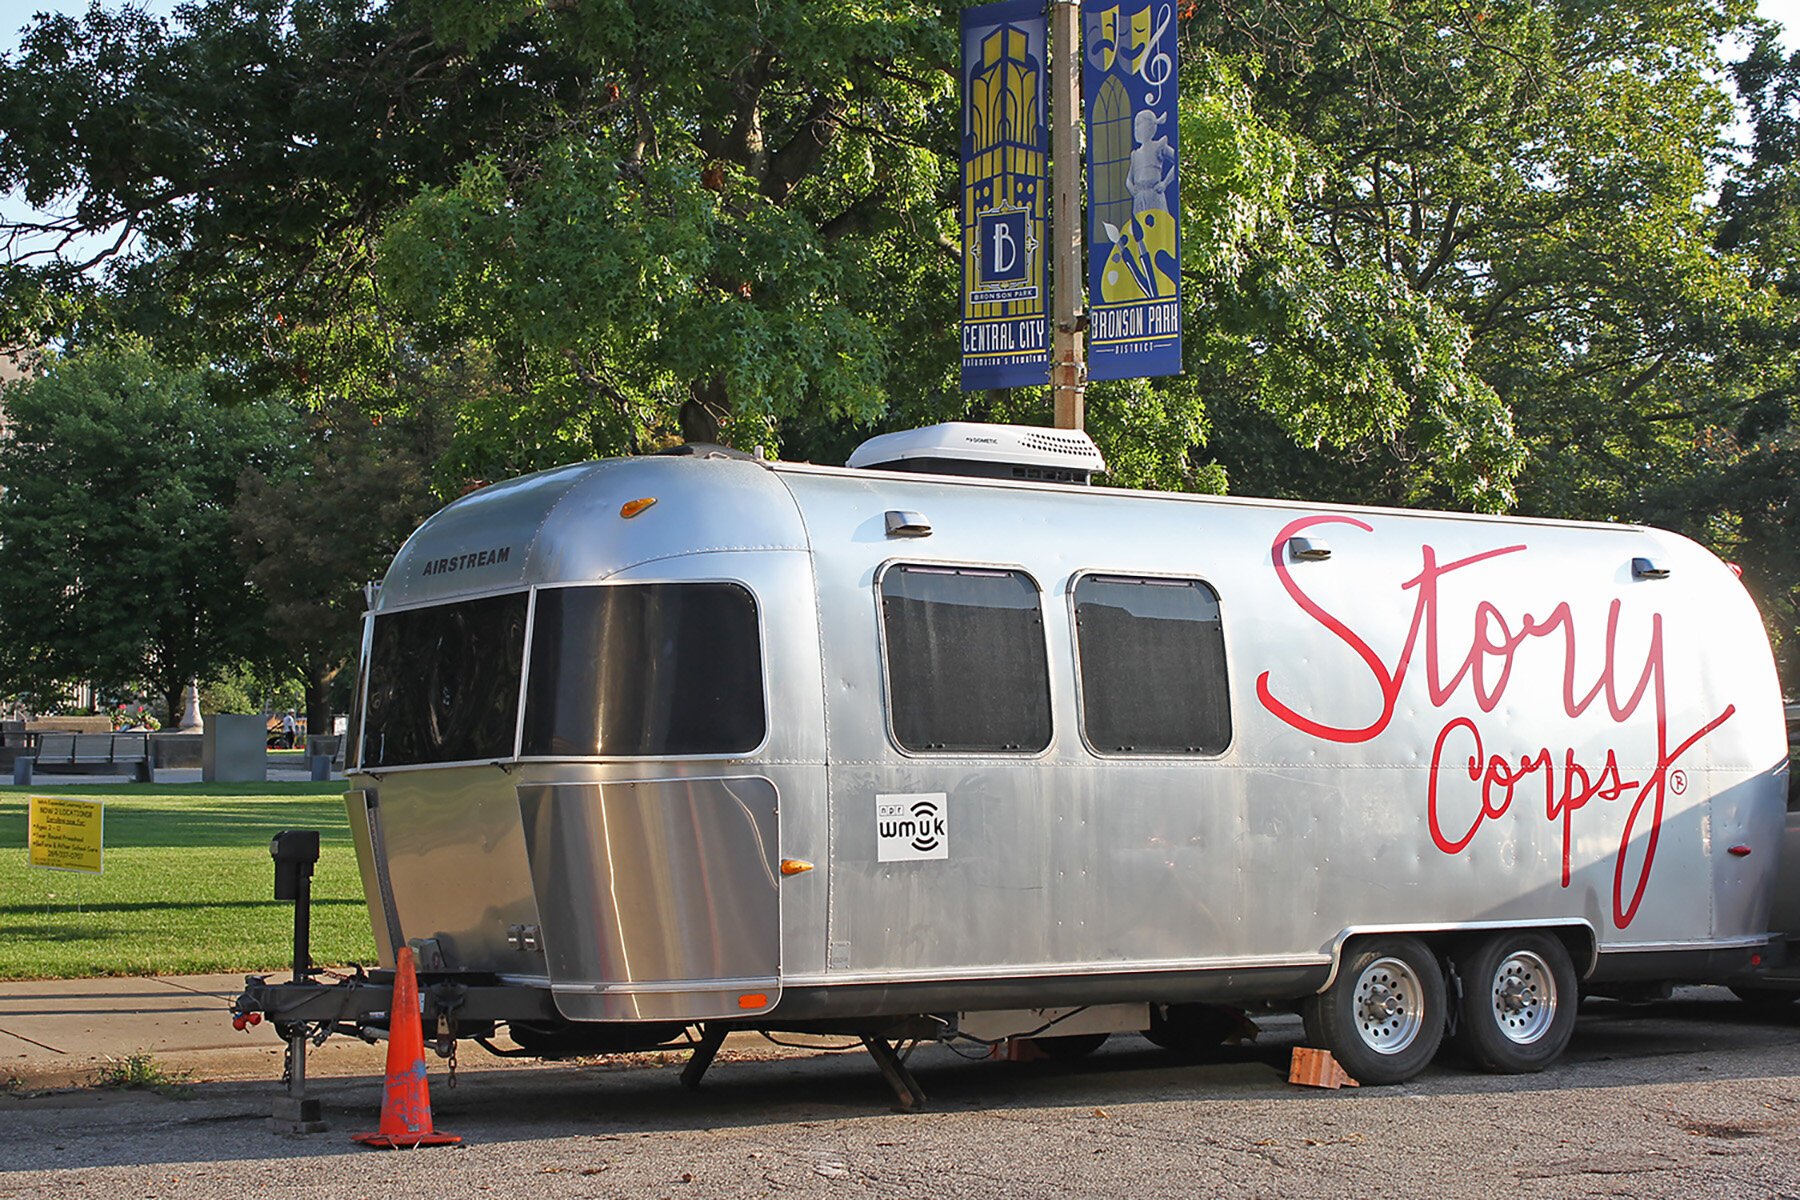 The StoryCorps mobile studio was parked by Bronson Park on July 5. Immediately a break- in occurred overnight but recording sessions were arranged in the downtown Kalamazoo Public Library.